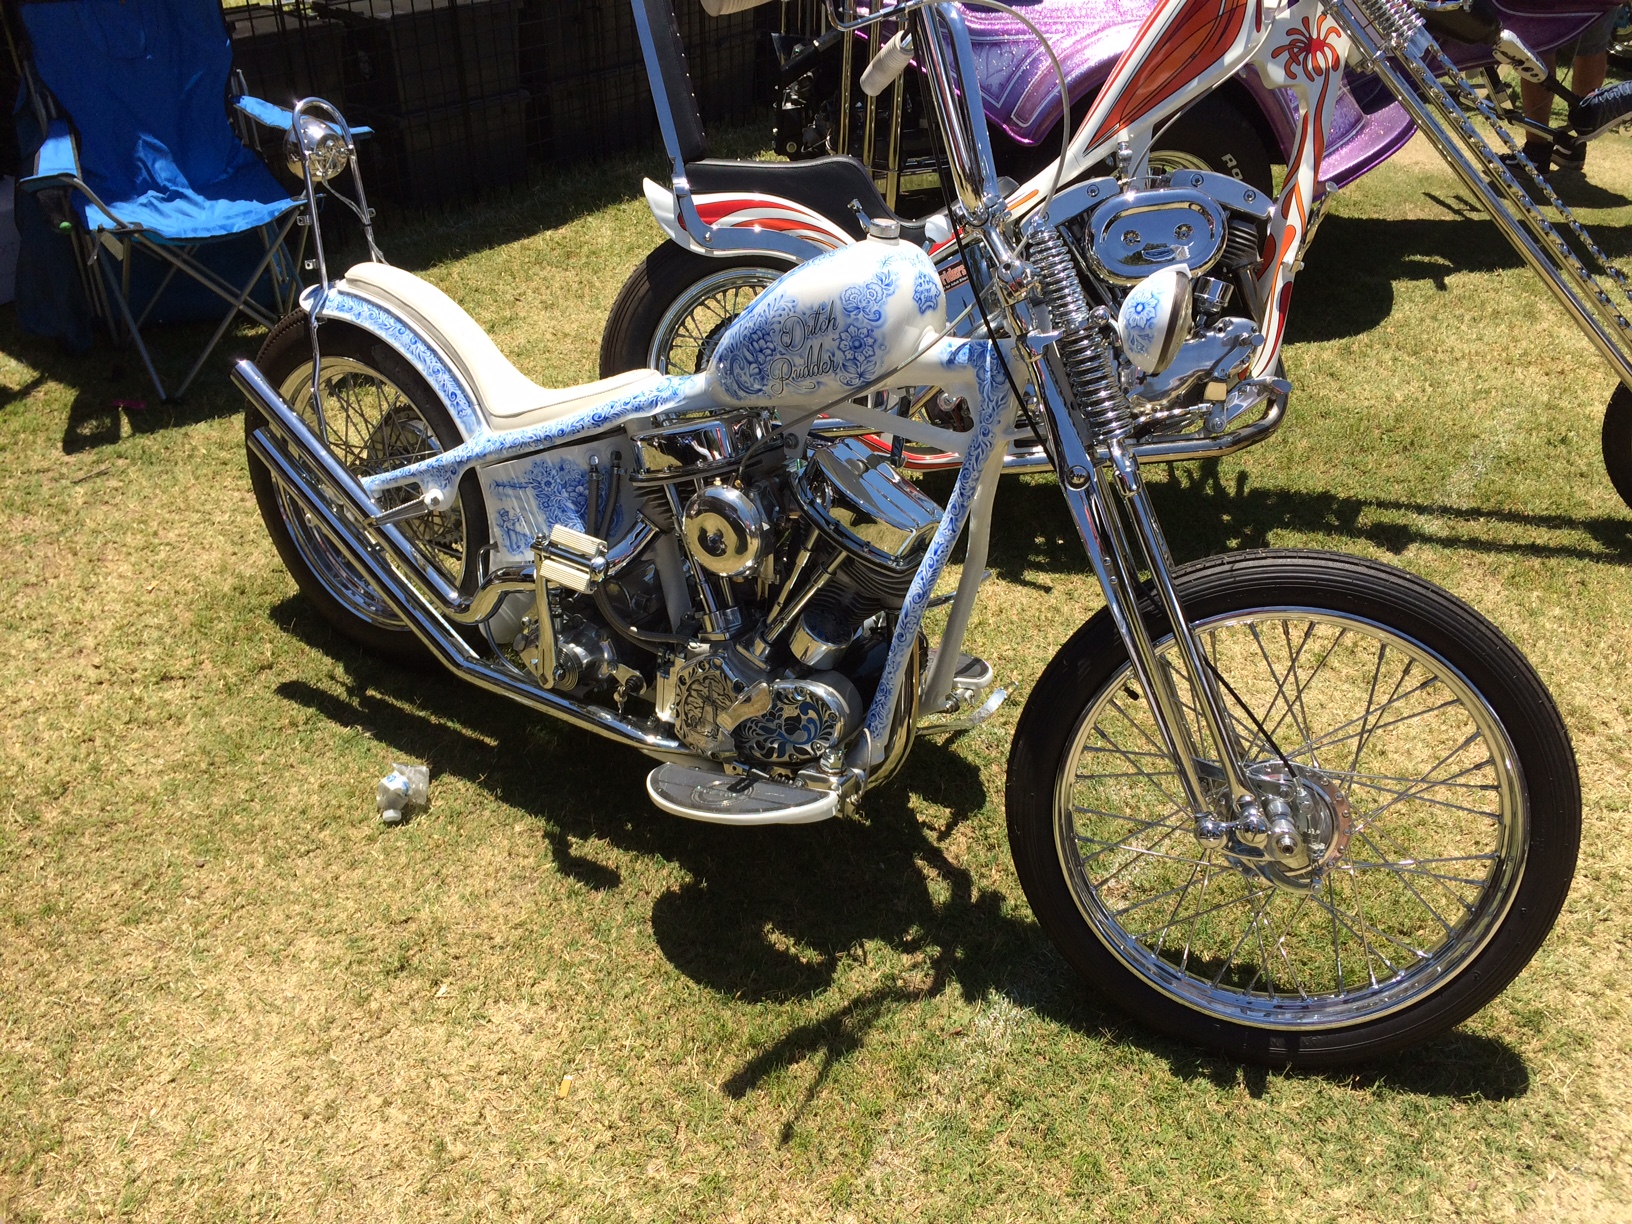 Born Free Motorcycle Show - Harley Davidson Forums